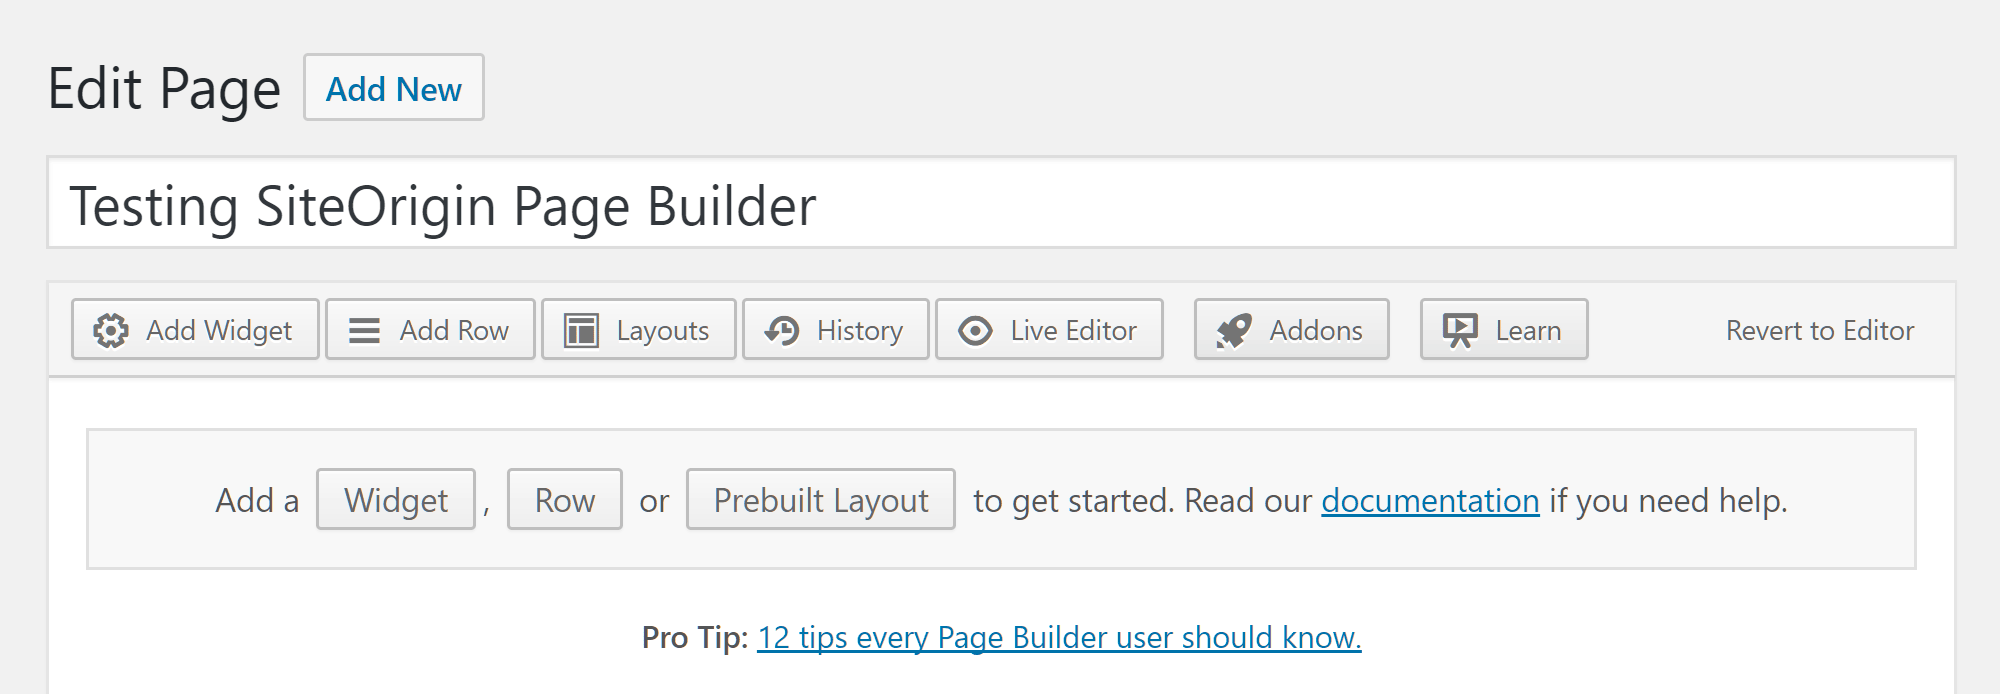 SiteOrigin Page Builder Getting Started Options